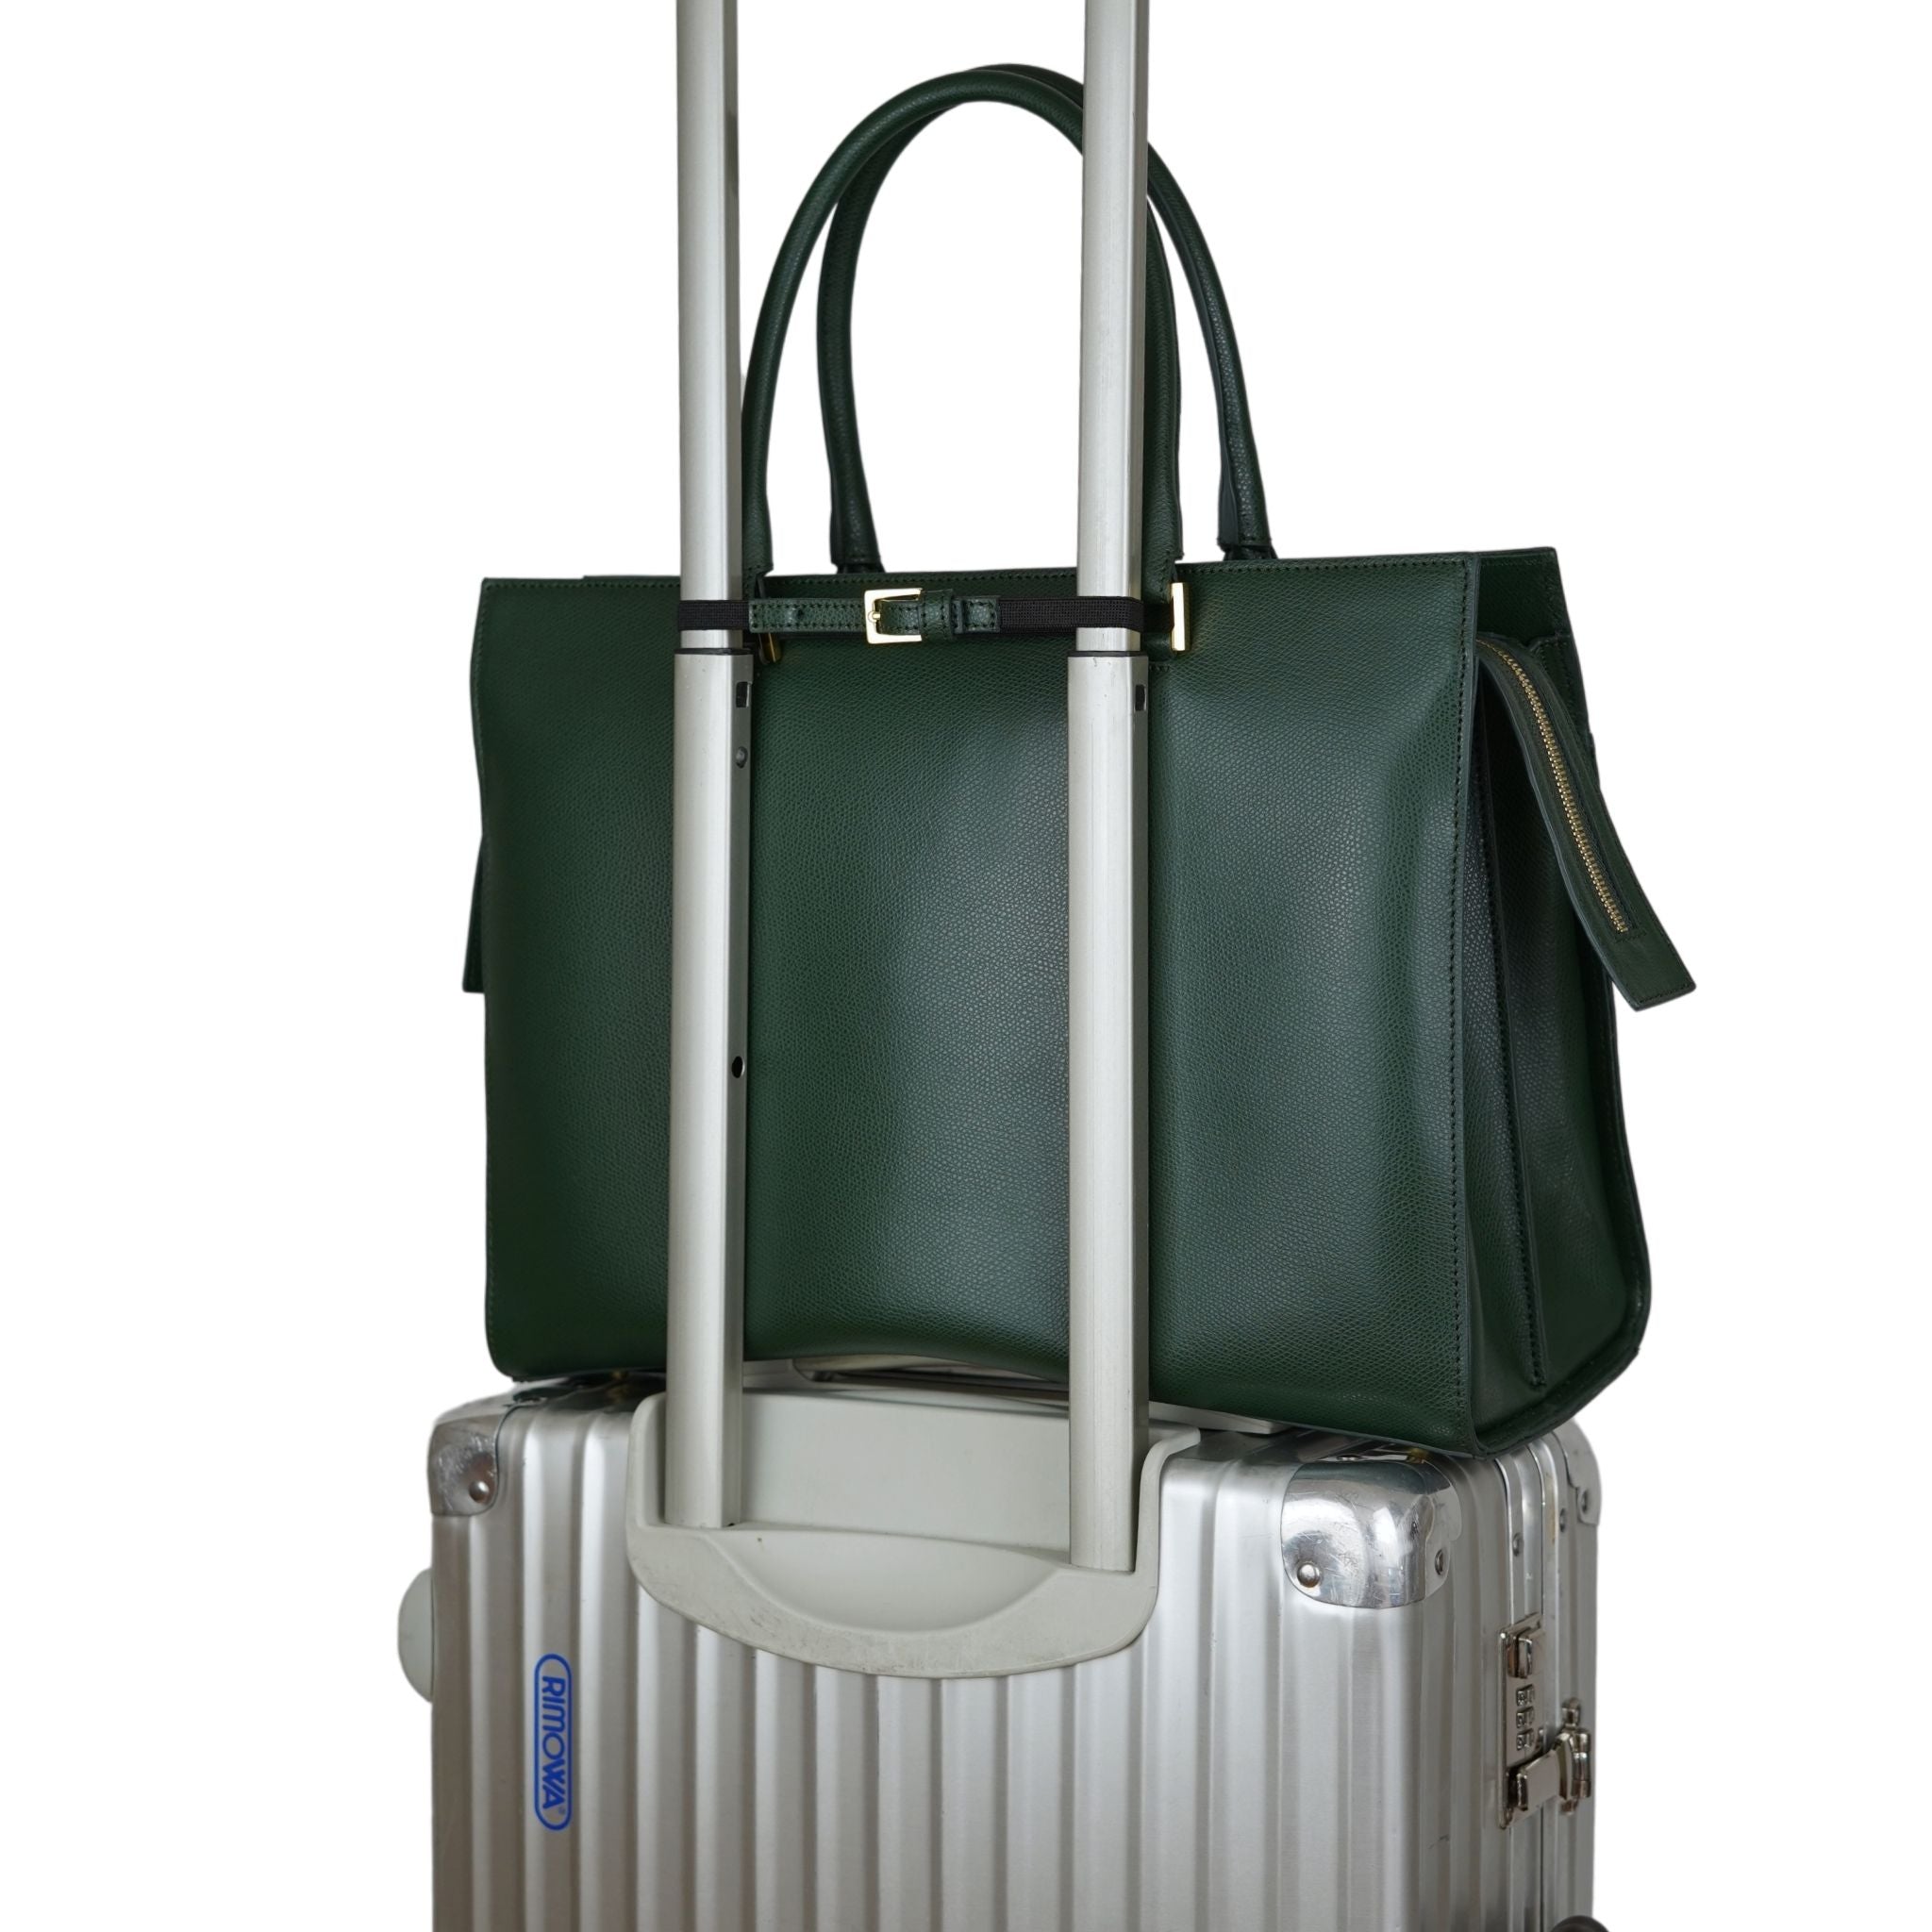 AMELI Zurich | CENTRAL | Dark Green | Pebbled Leather | On A Suitcase